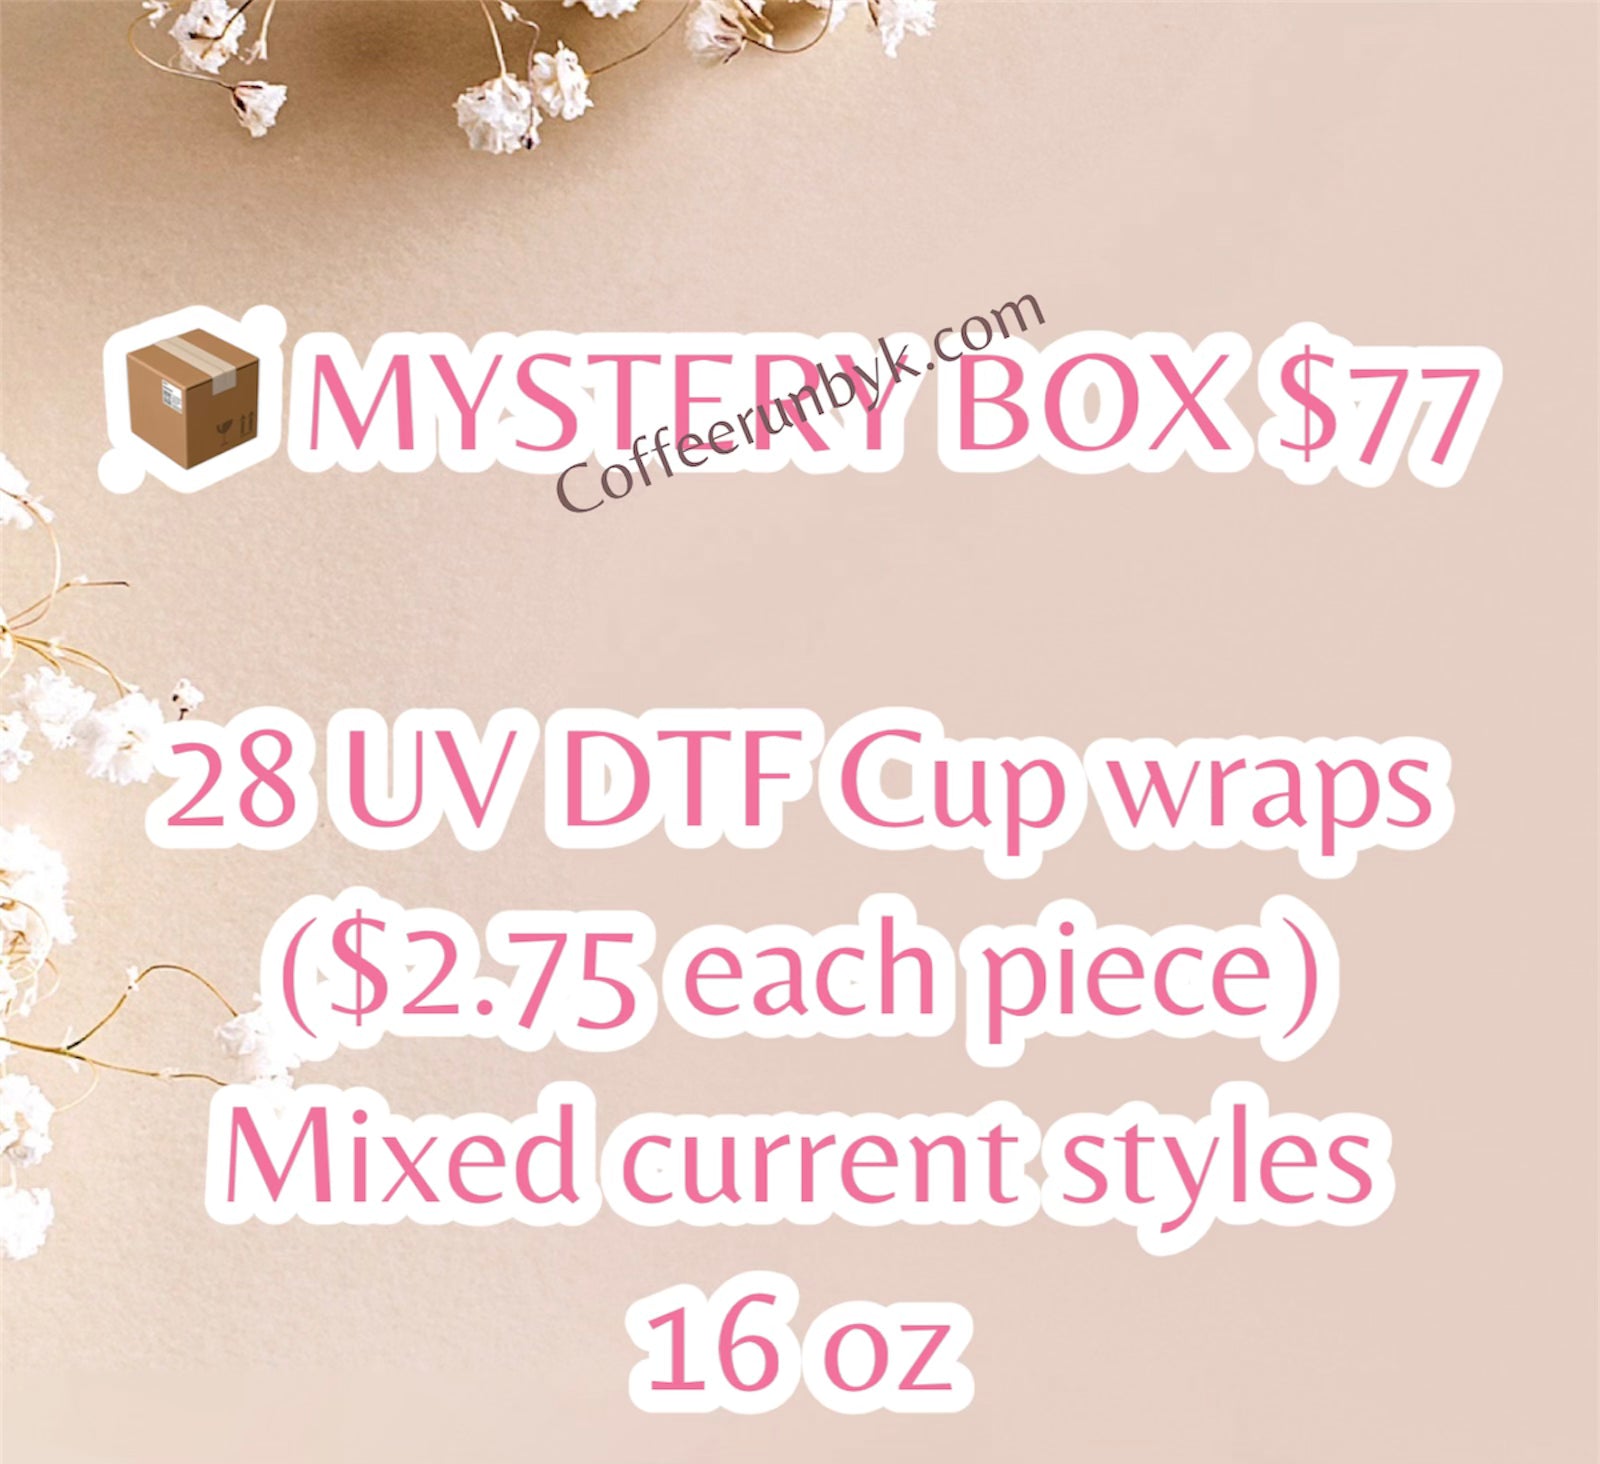 Uvdtf cup wraps that you could recieve in your mustery bundle! You